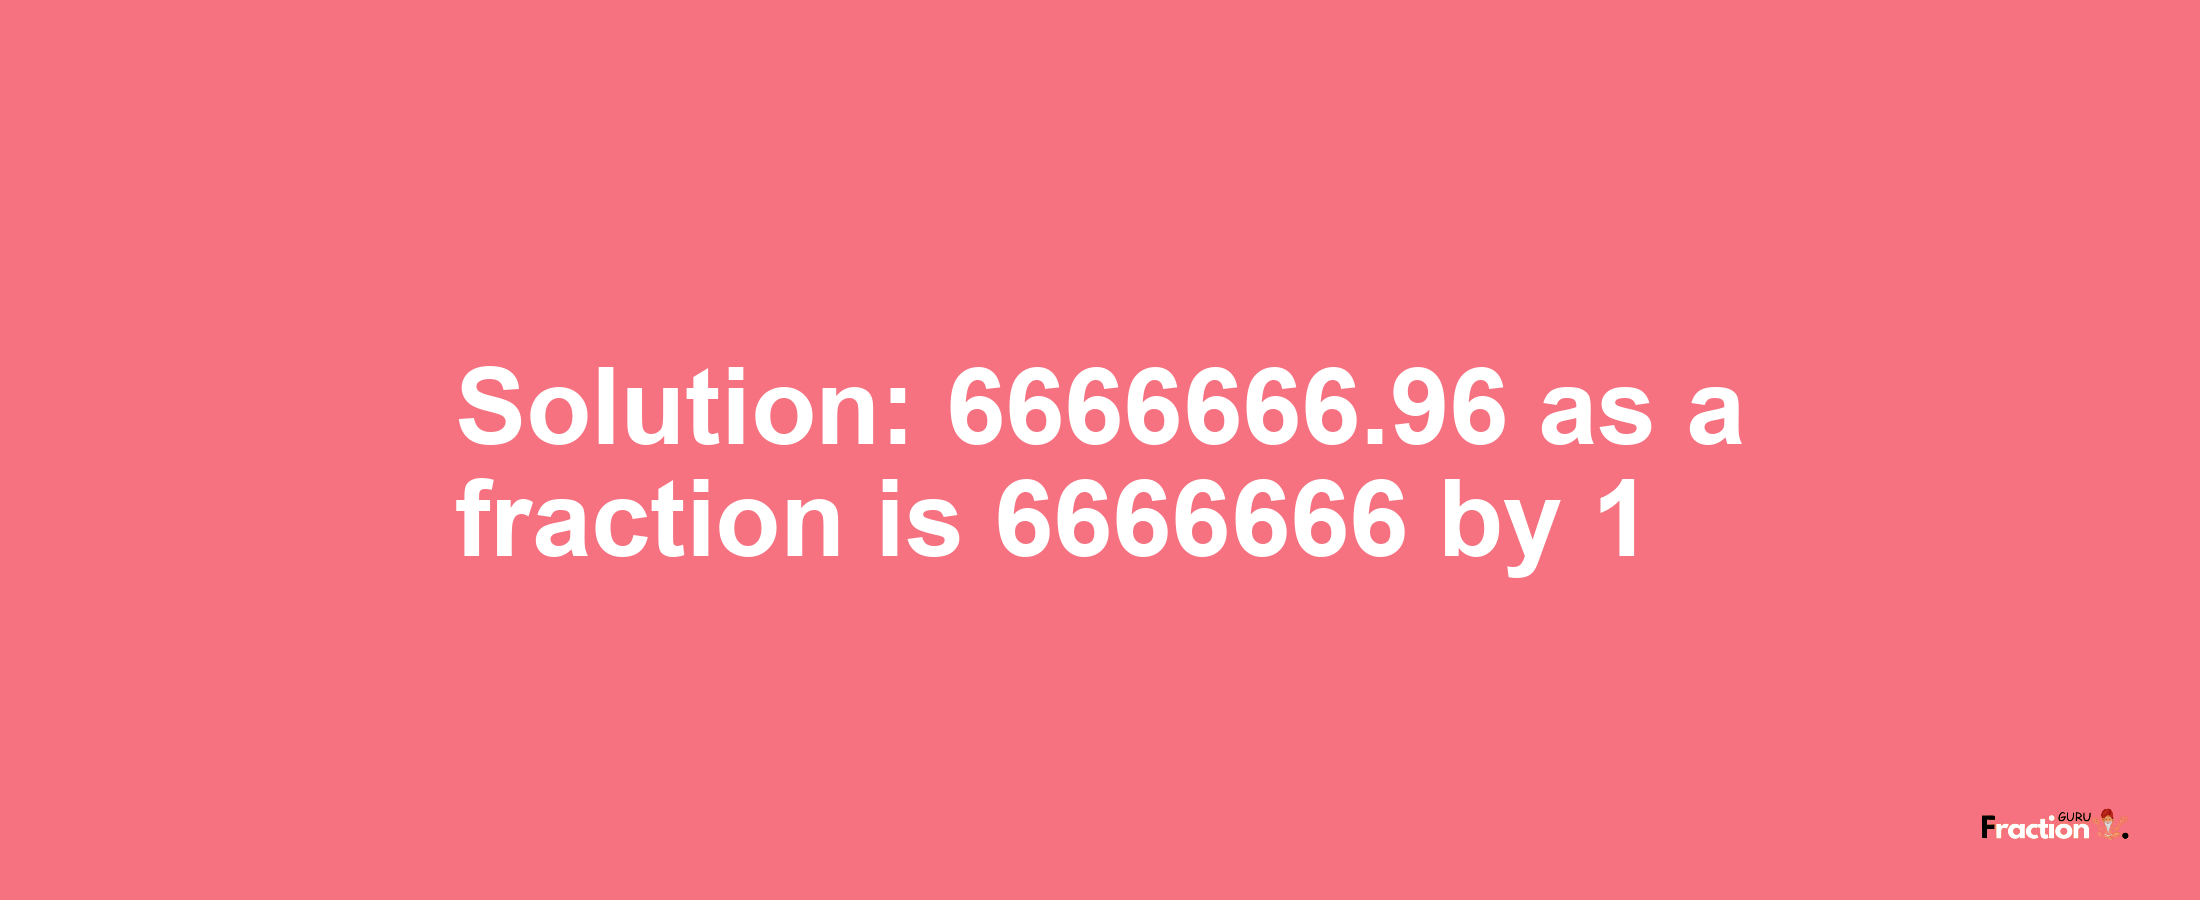 Solution:6666666.96 as a fraction is 6666666/1